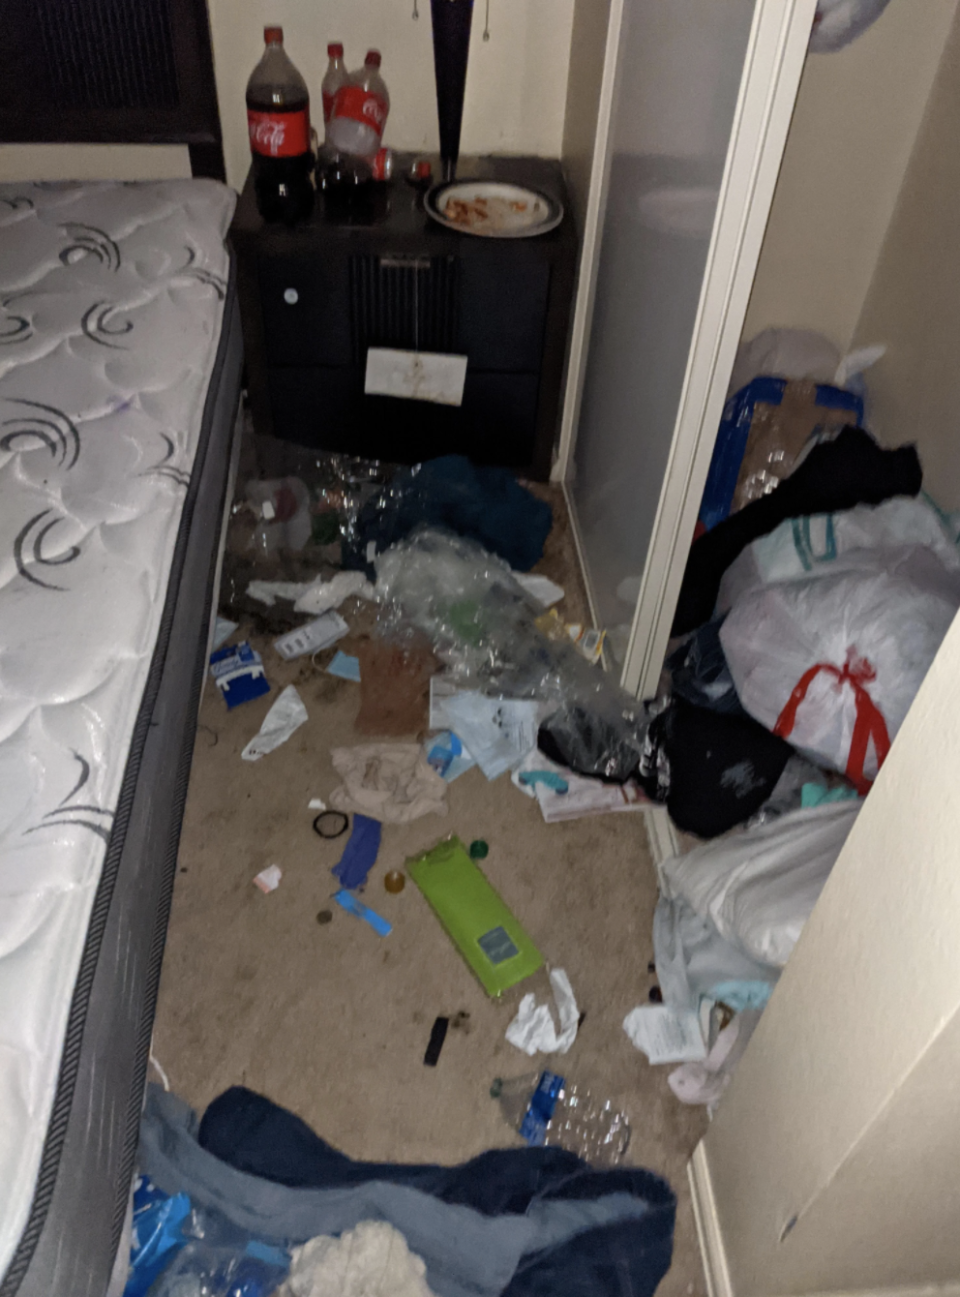 Bad roomie's room, dirty with used water bottles, soda bottles, and trash bags